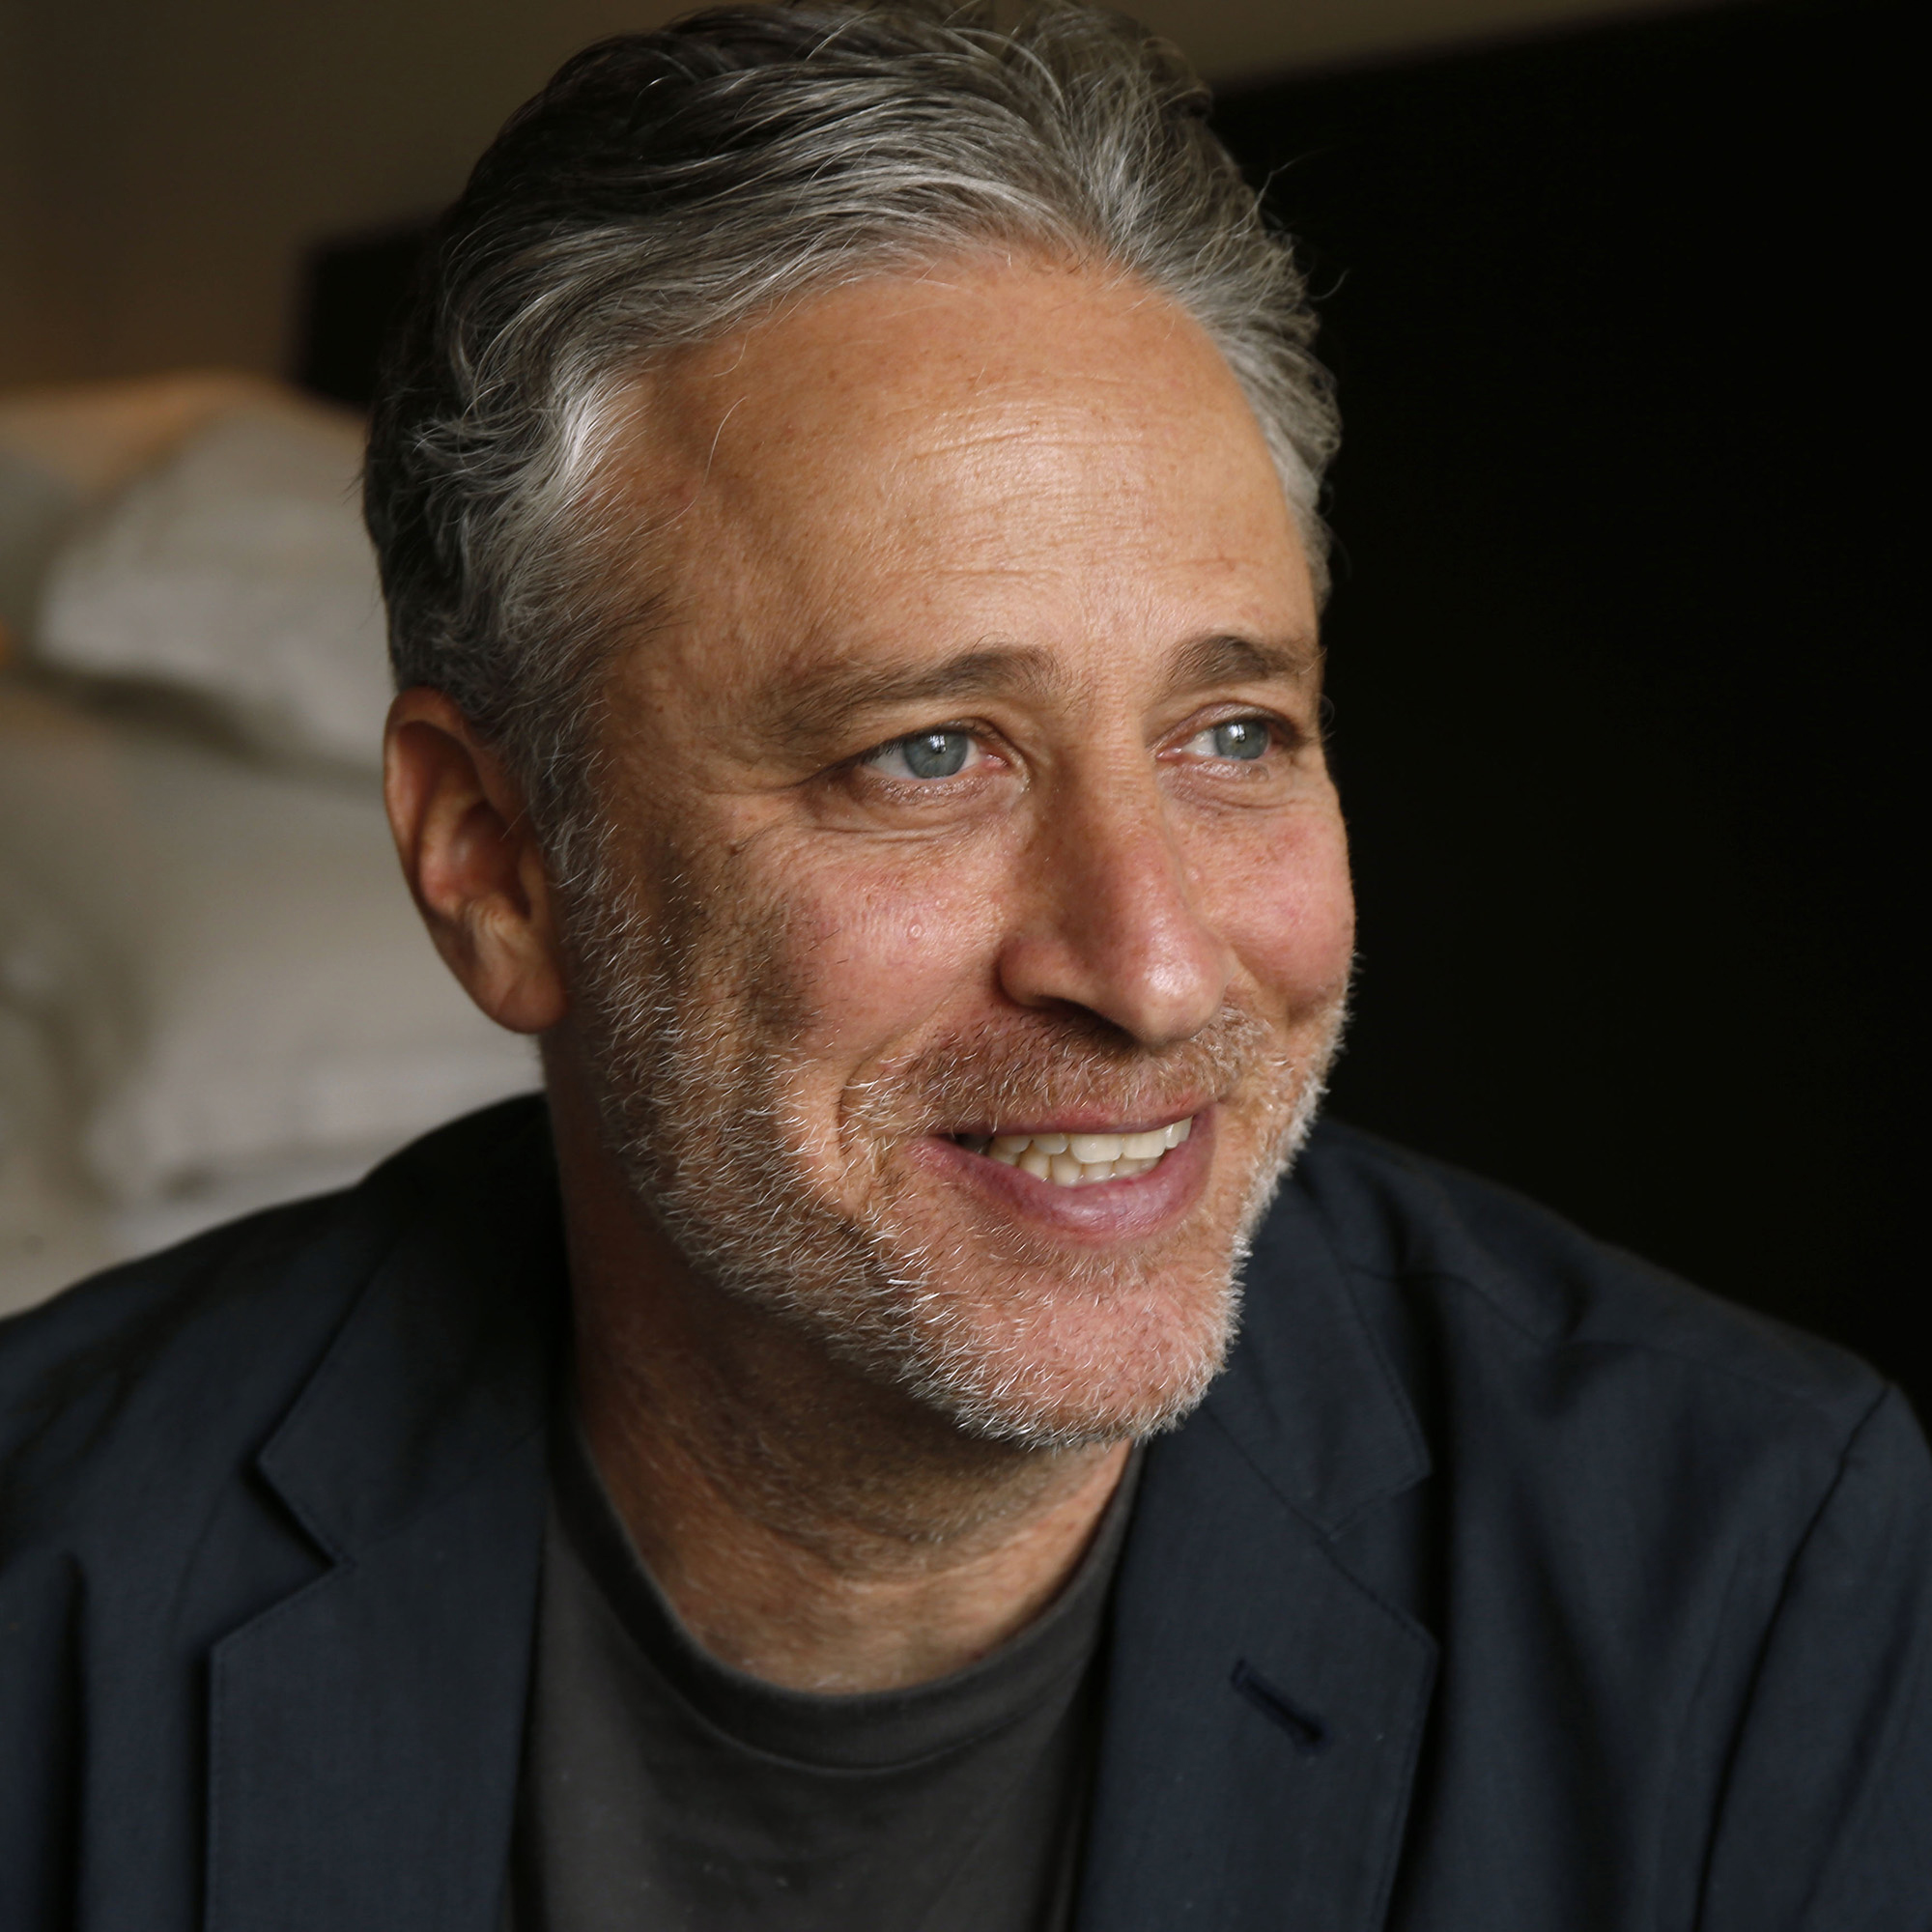 Writer-director Jon Stewart sits and smiles, facing slightly to the right.